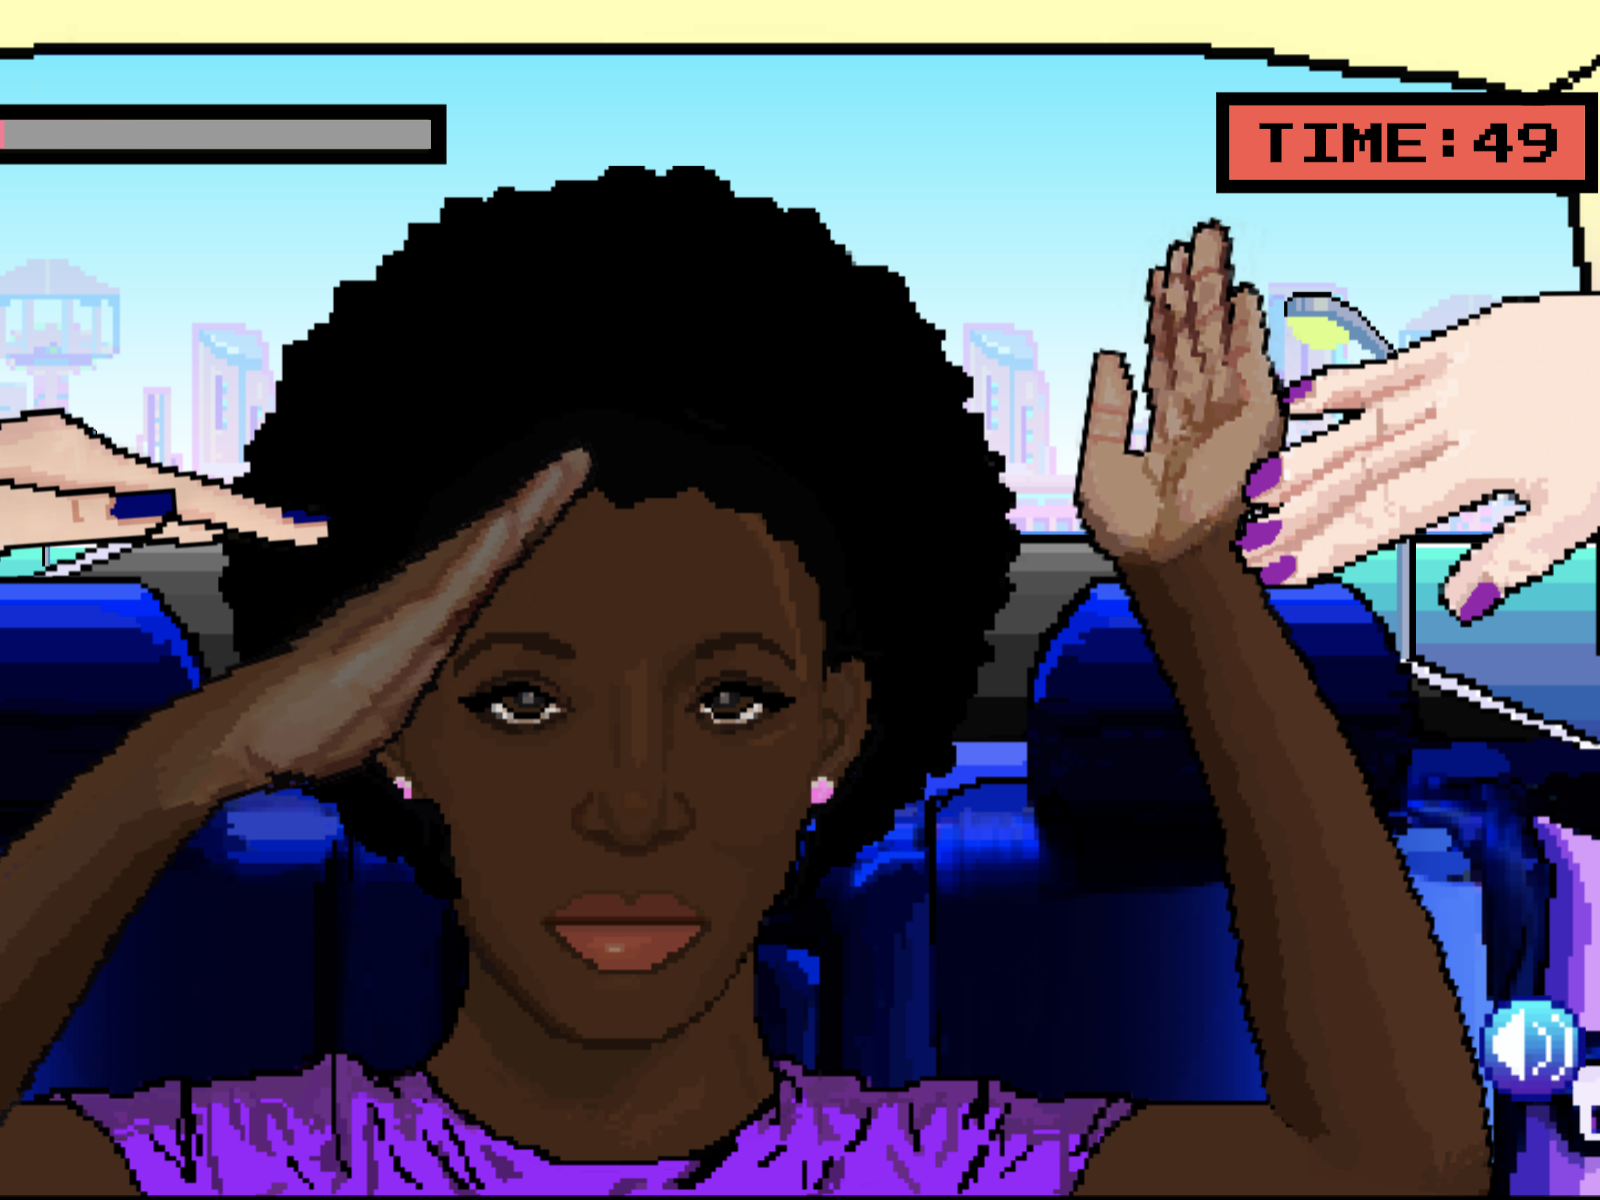 Black woman with an Afro using her hands to block white hands from touching her hair